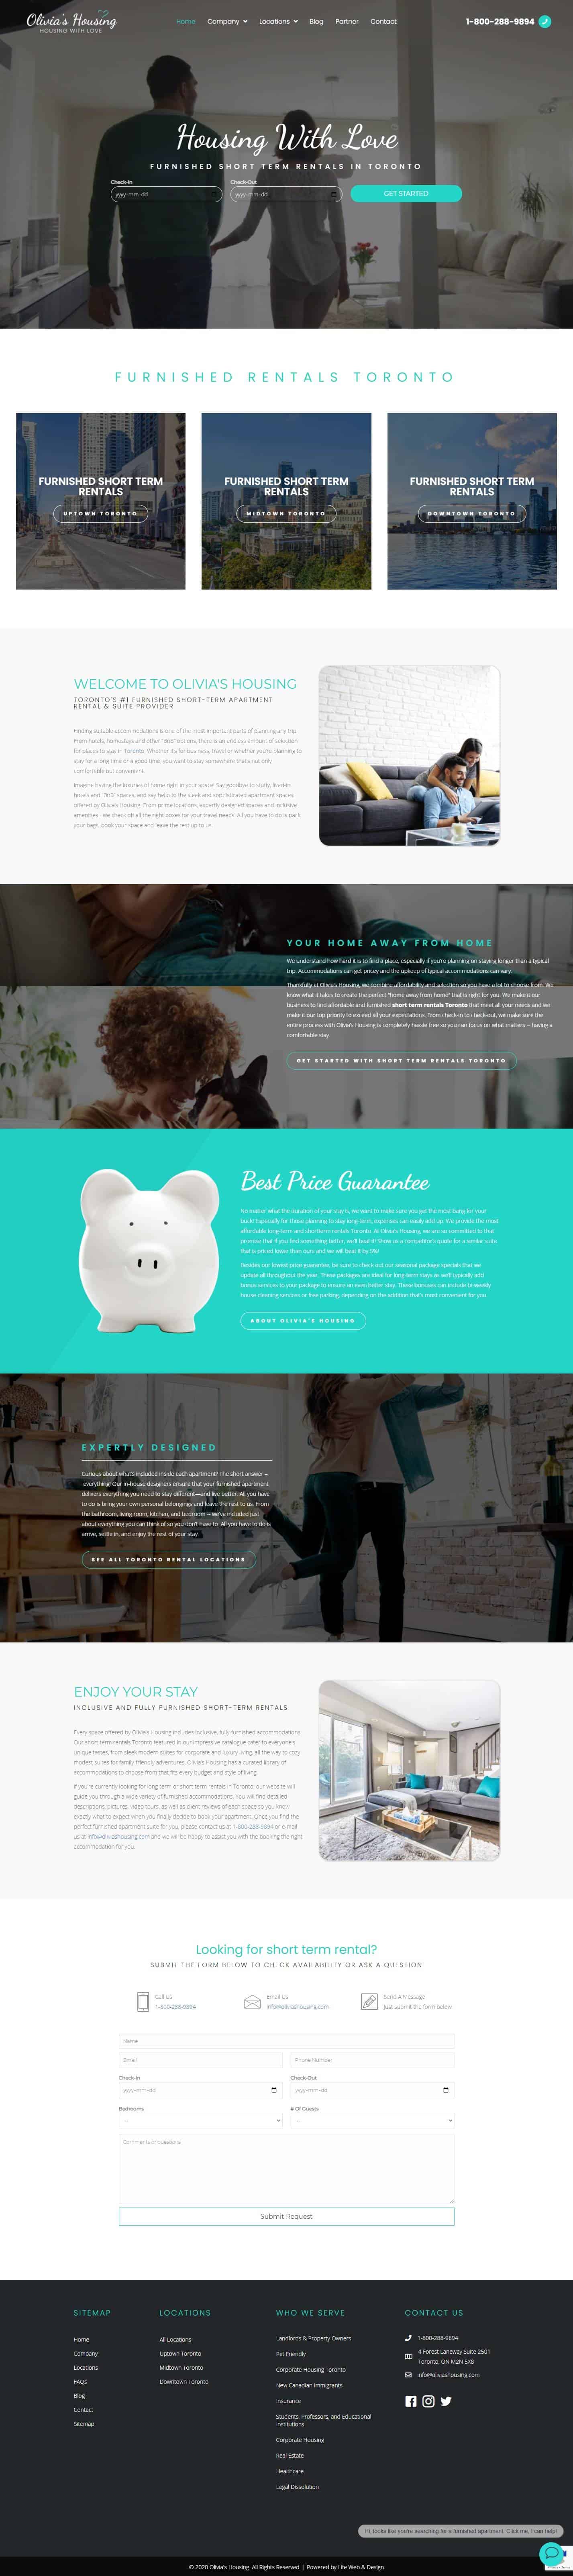 web design project for short term rental provider in Toronto On